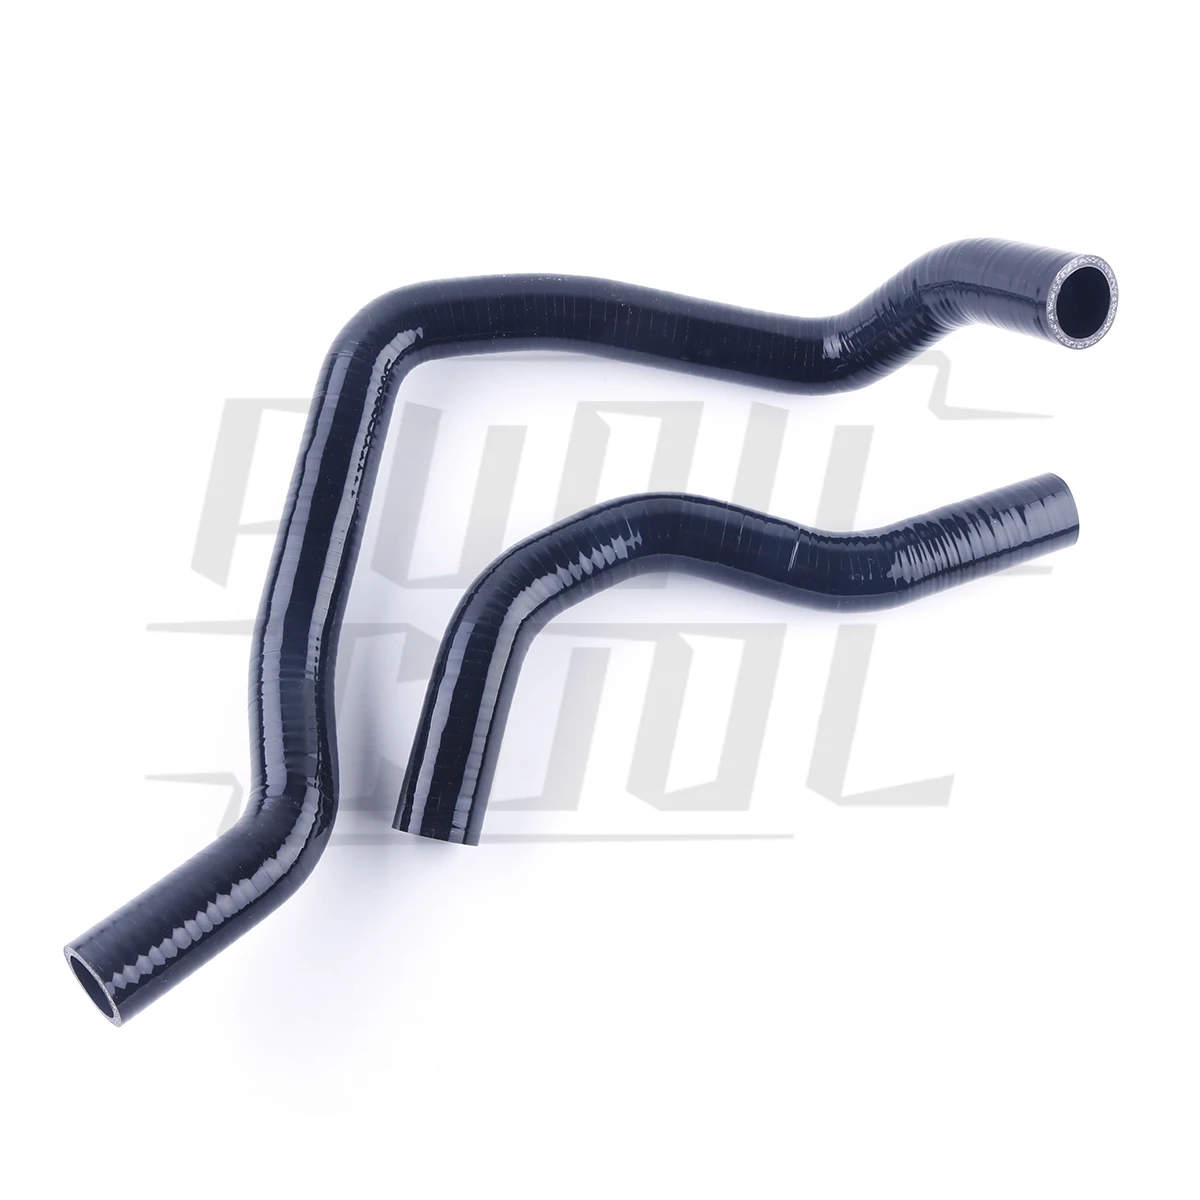 Silicone Tube For 1988-1991 Honda CRX 88 91 Civic SiR VT EE8 EE9 EF8 EF9 B16A 1989 1990 Radiator Hoses Pipe Kit 2Pcs